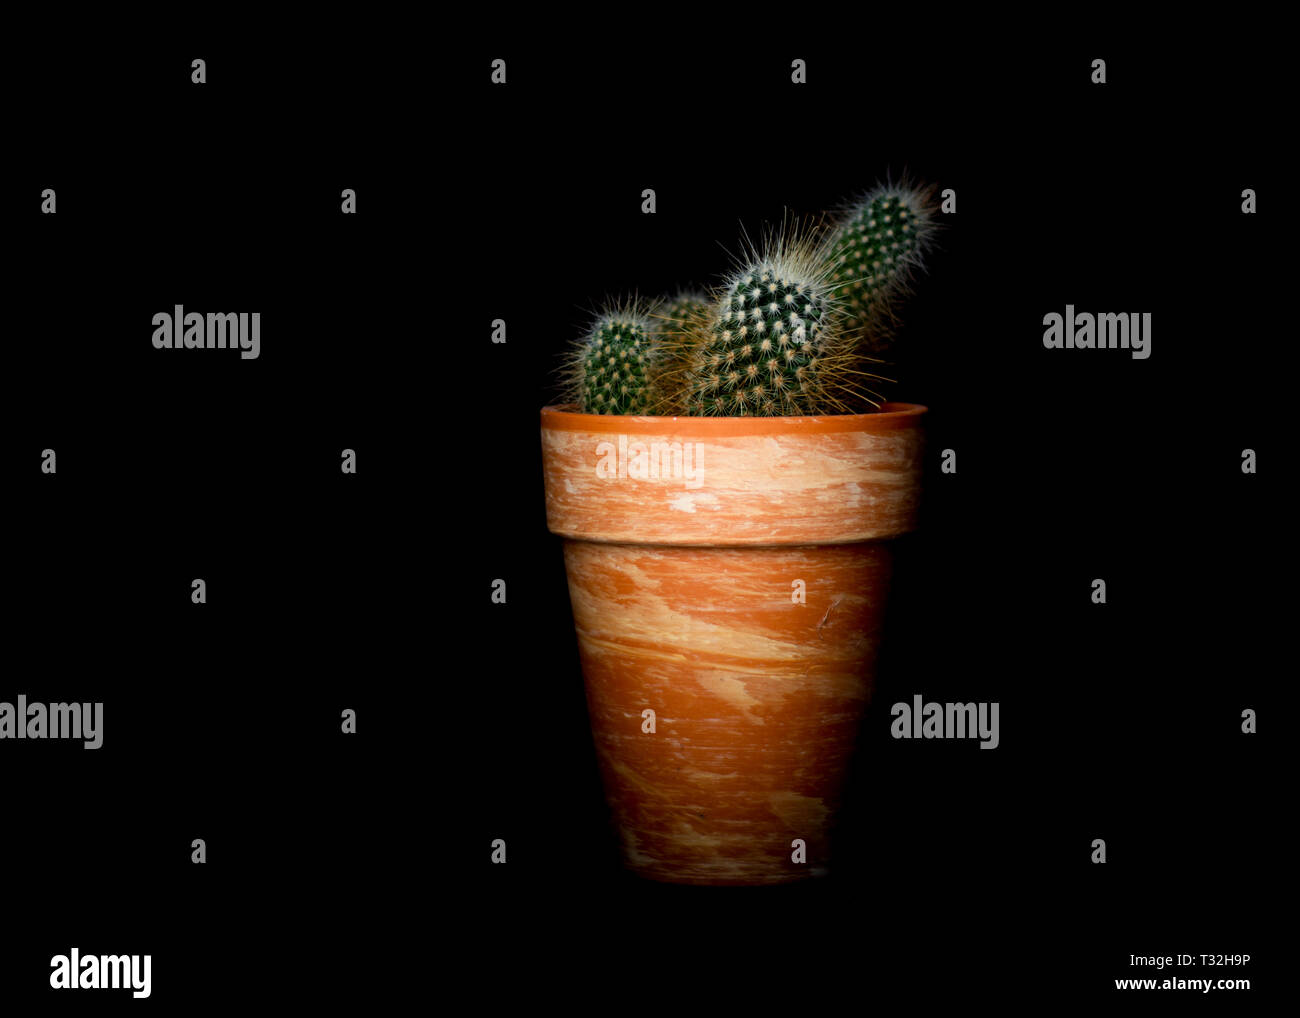 Cactus in a plant pot against a dark black background with only the plant in the light. Stock Photo